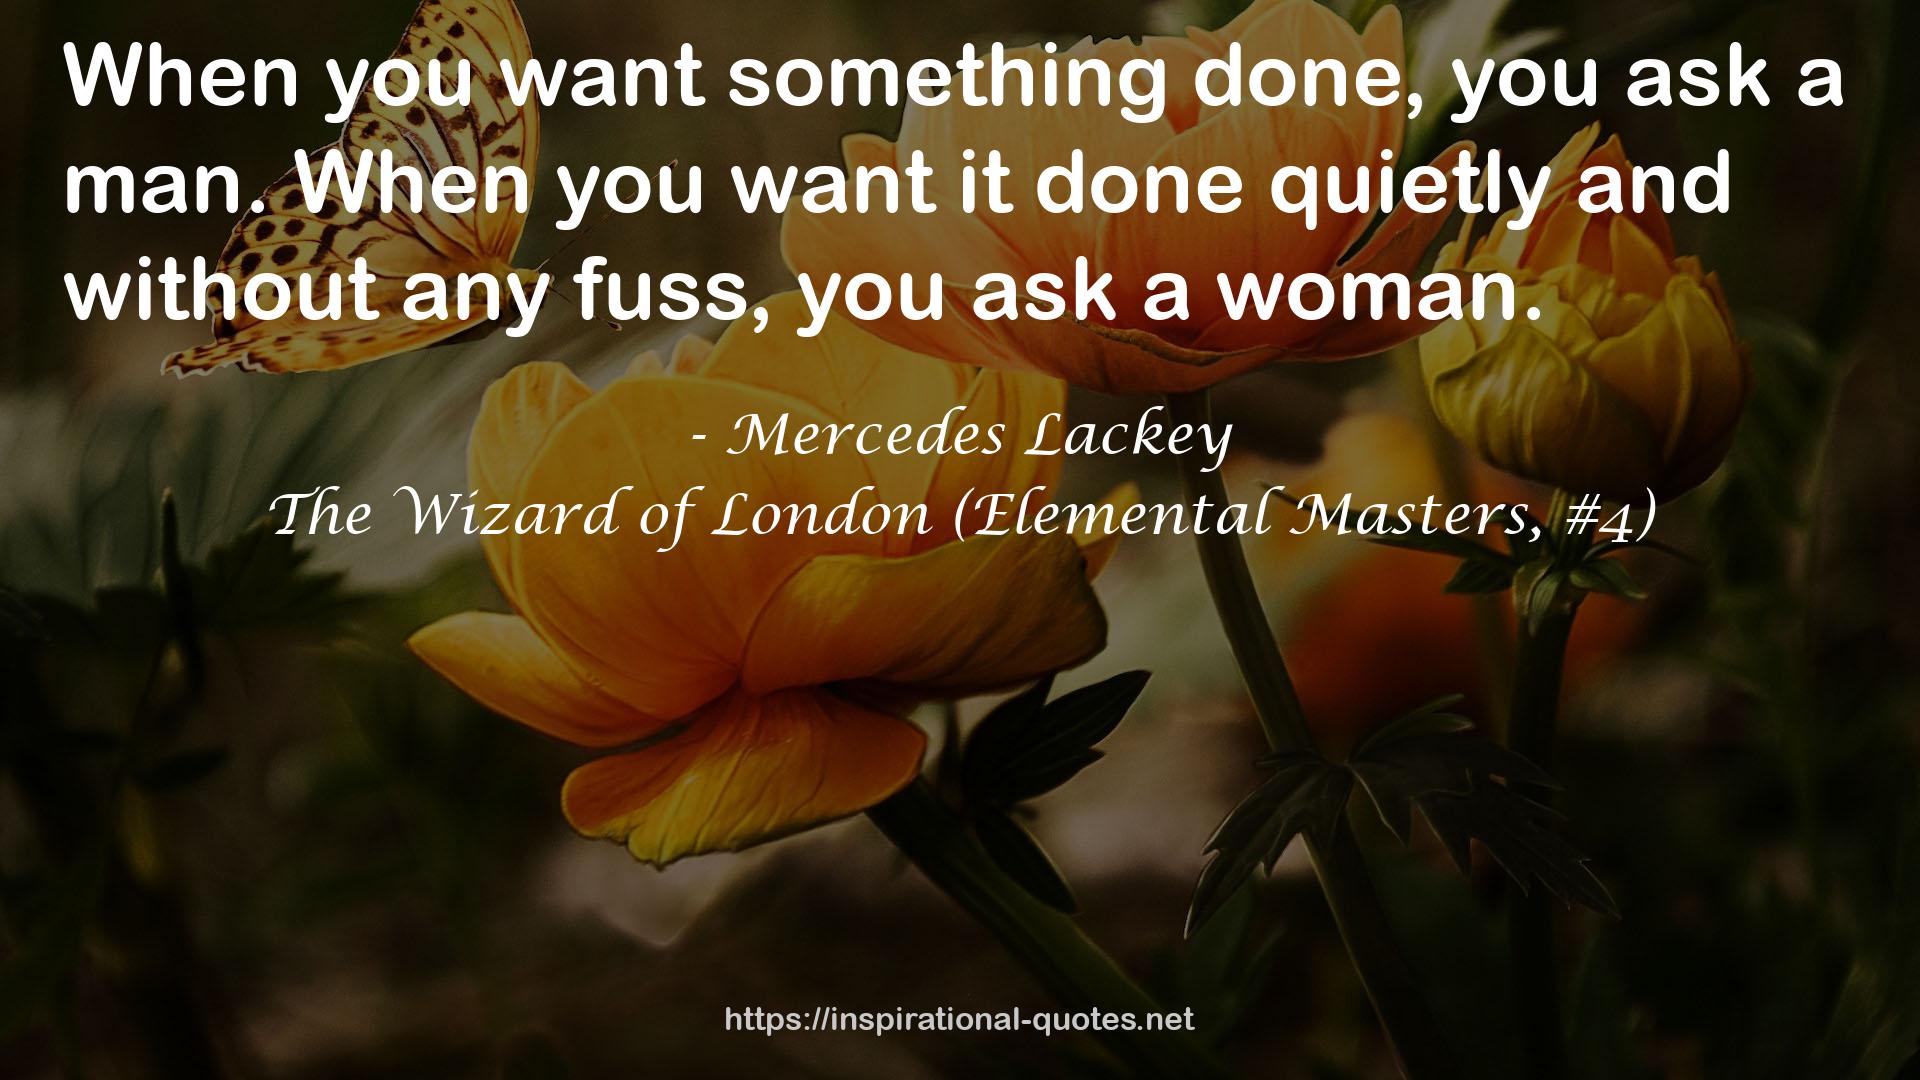 The Wizard of London (Elemental Masters, #4) QUOTES